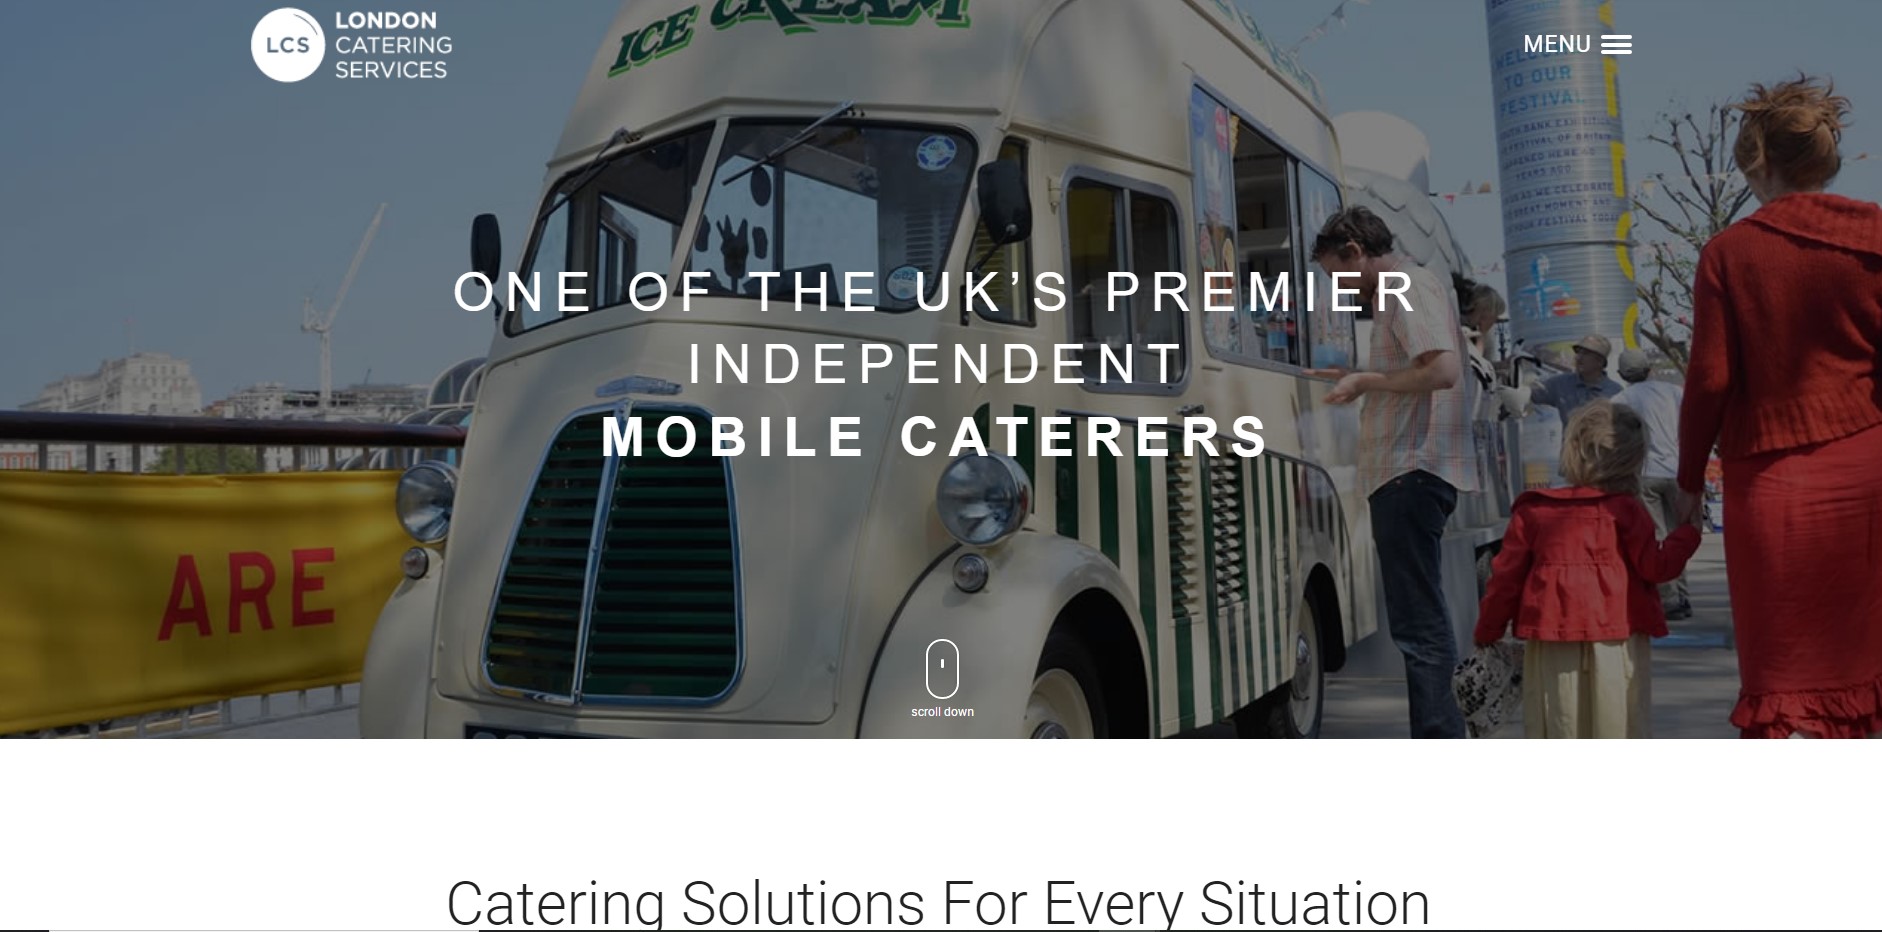 London Catering Services